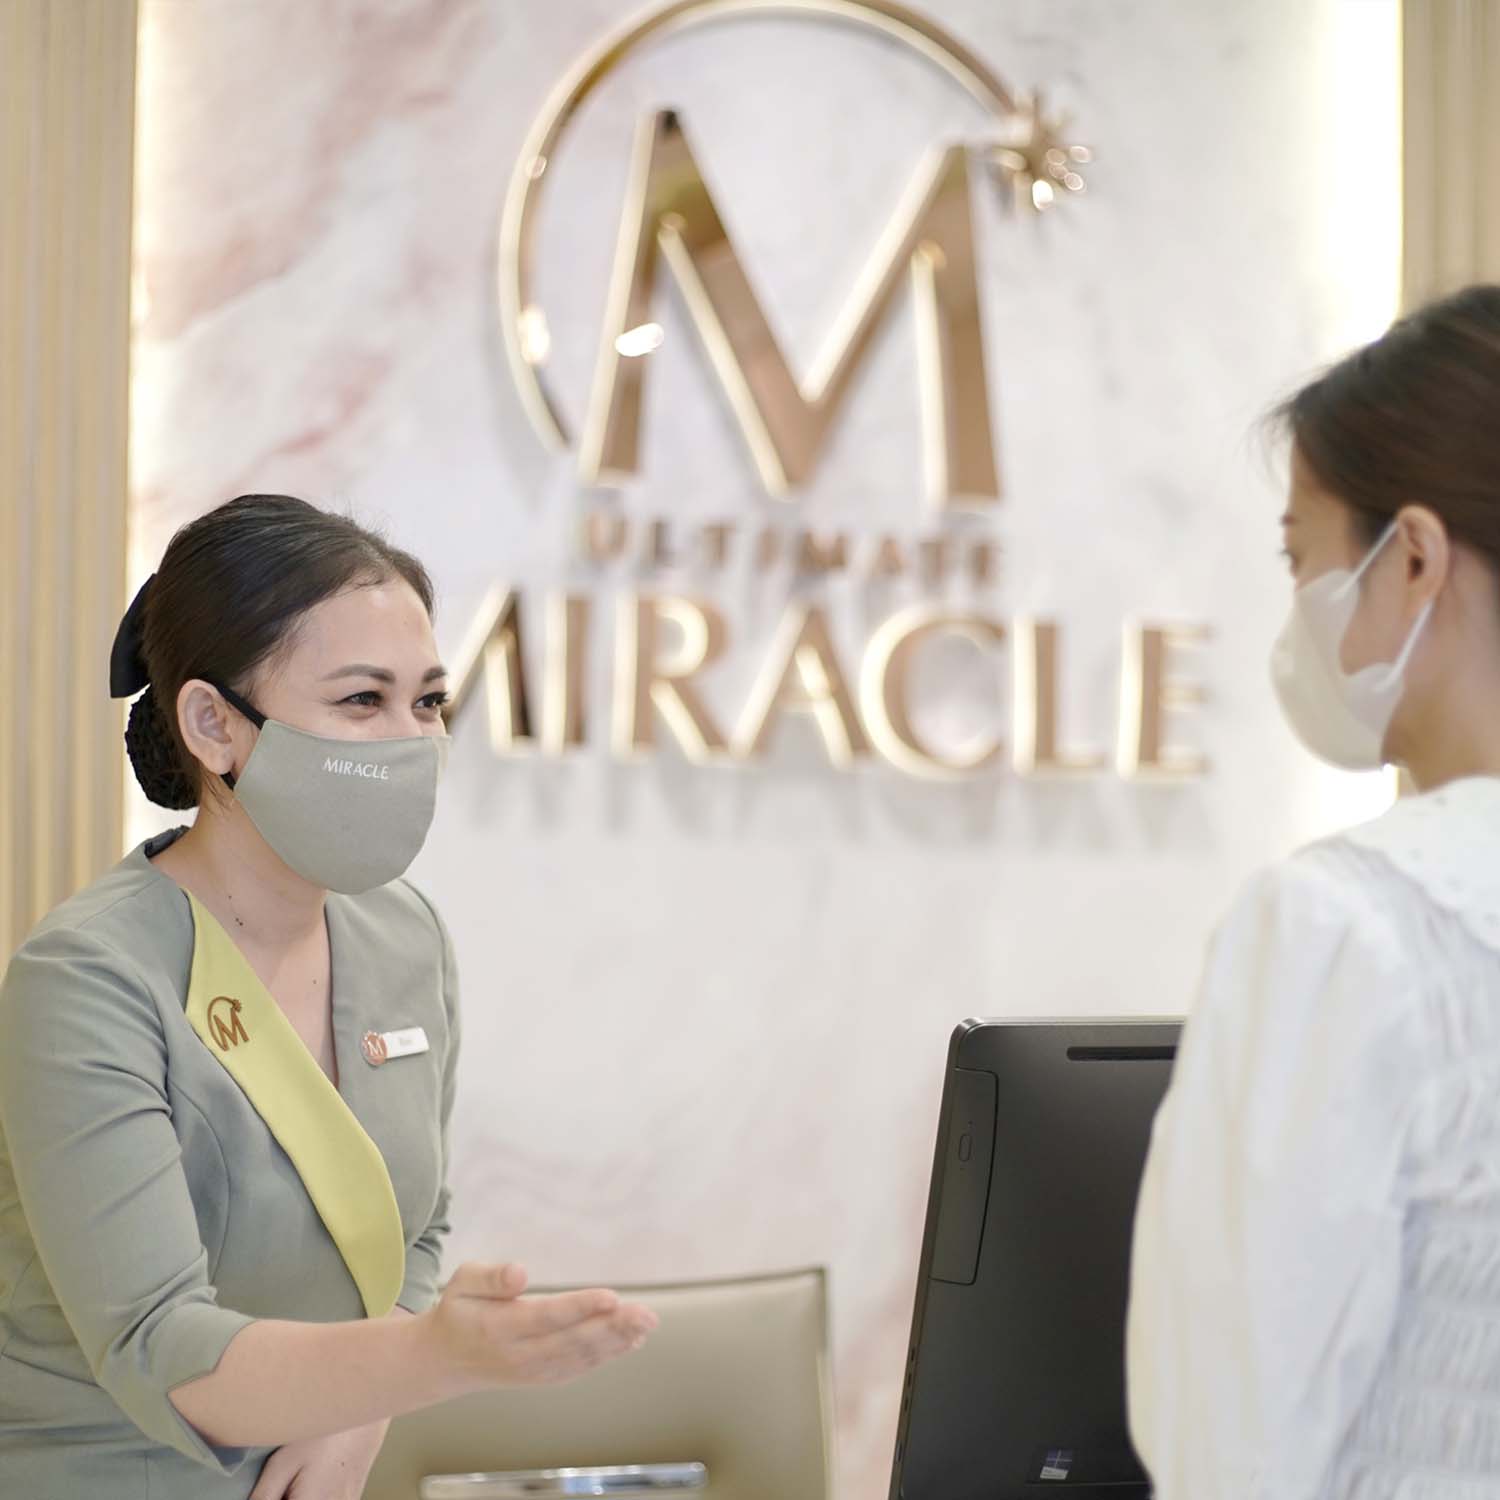 Ultimate Services from Miracle Ultimate